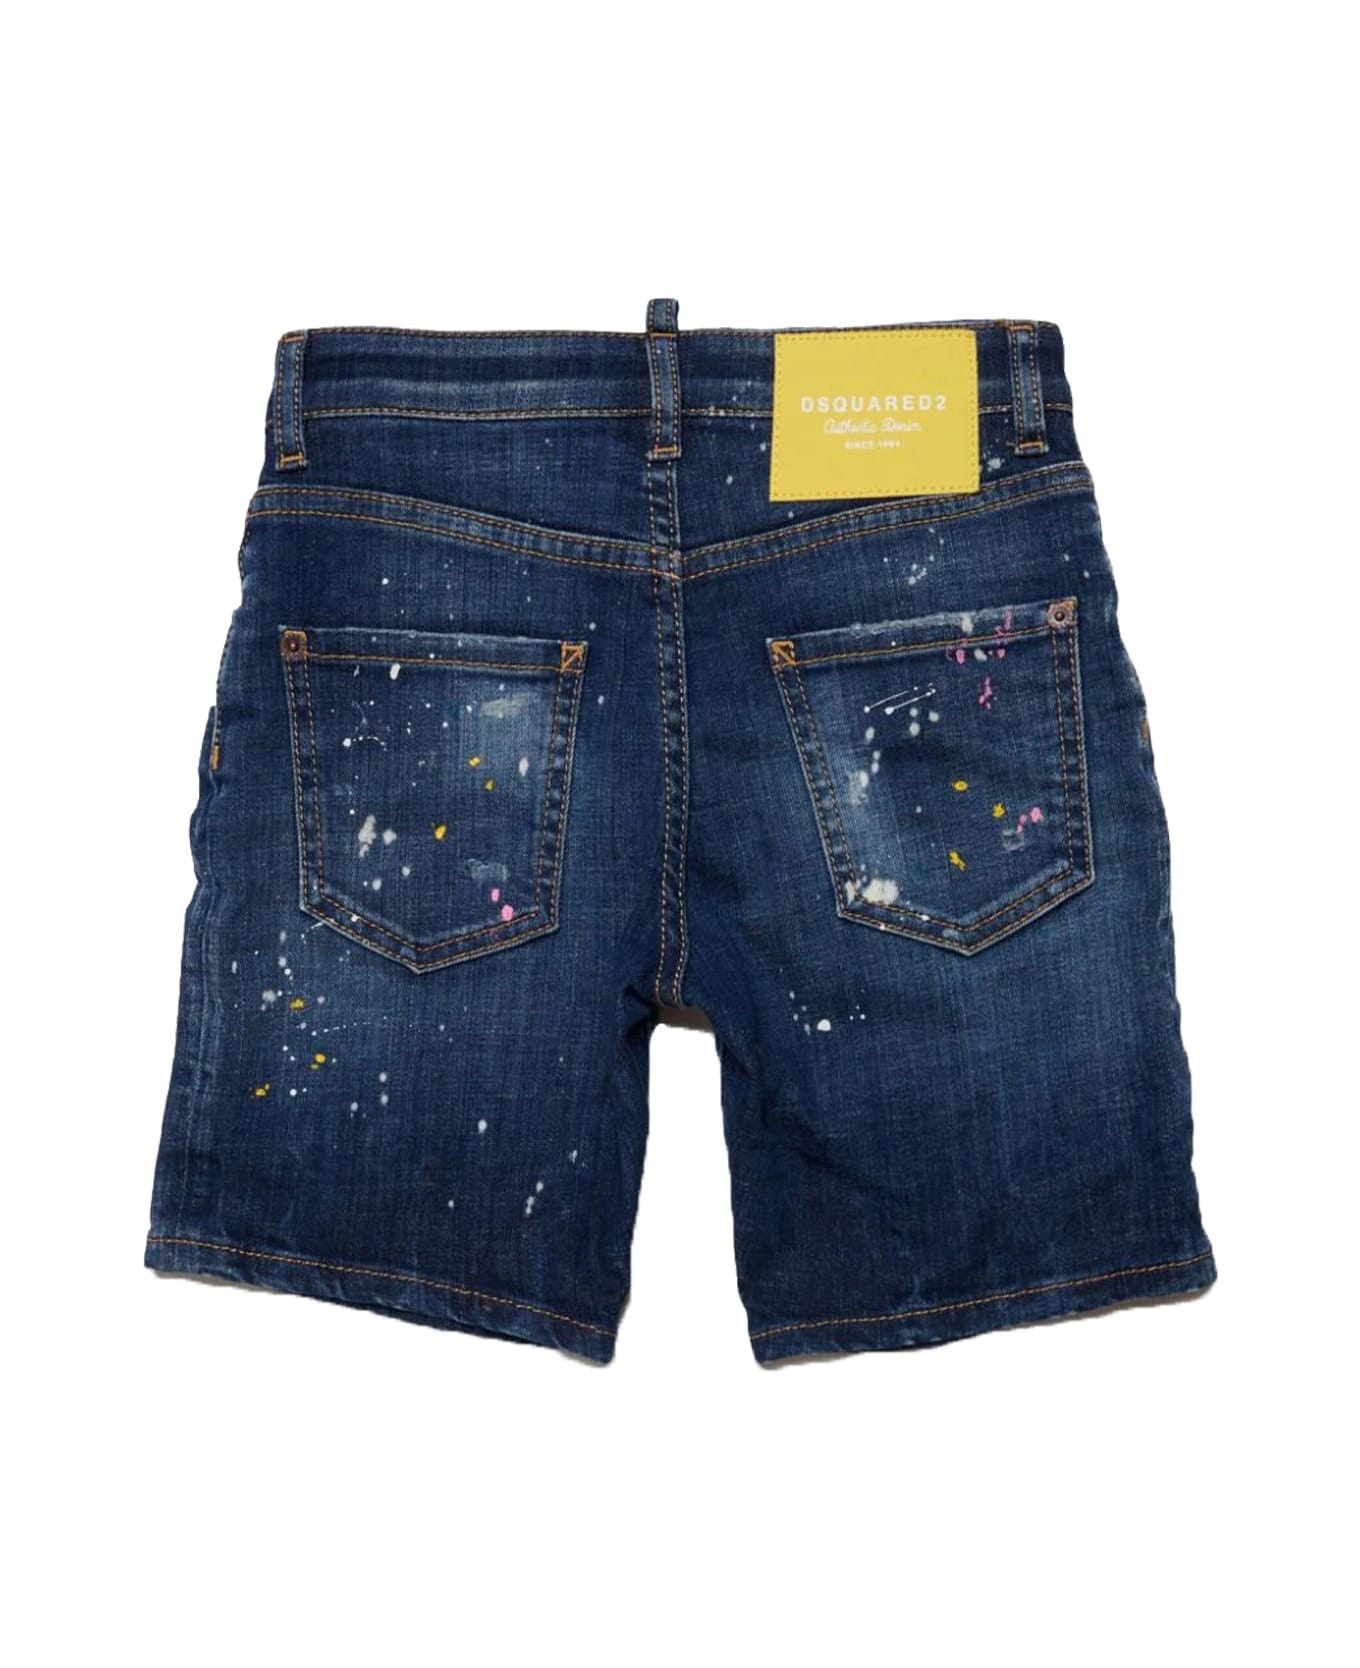 Dsquared2 Short Jeans - Blue ボトムス